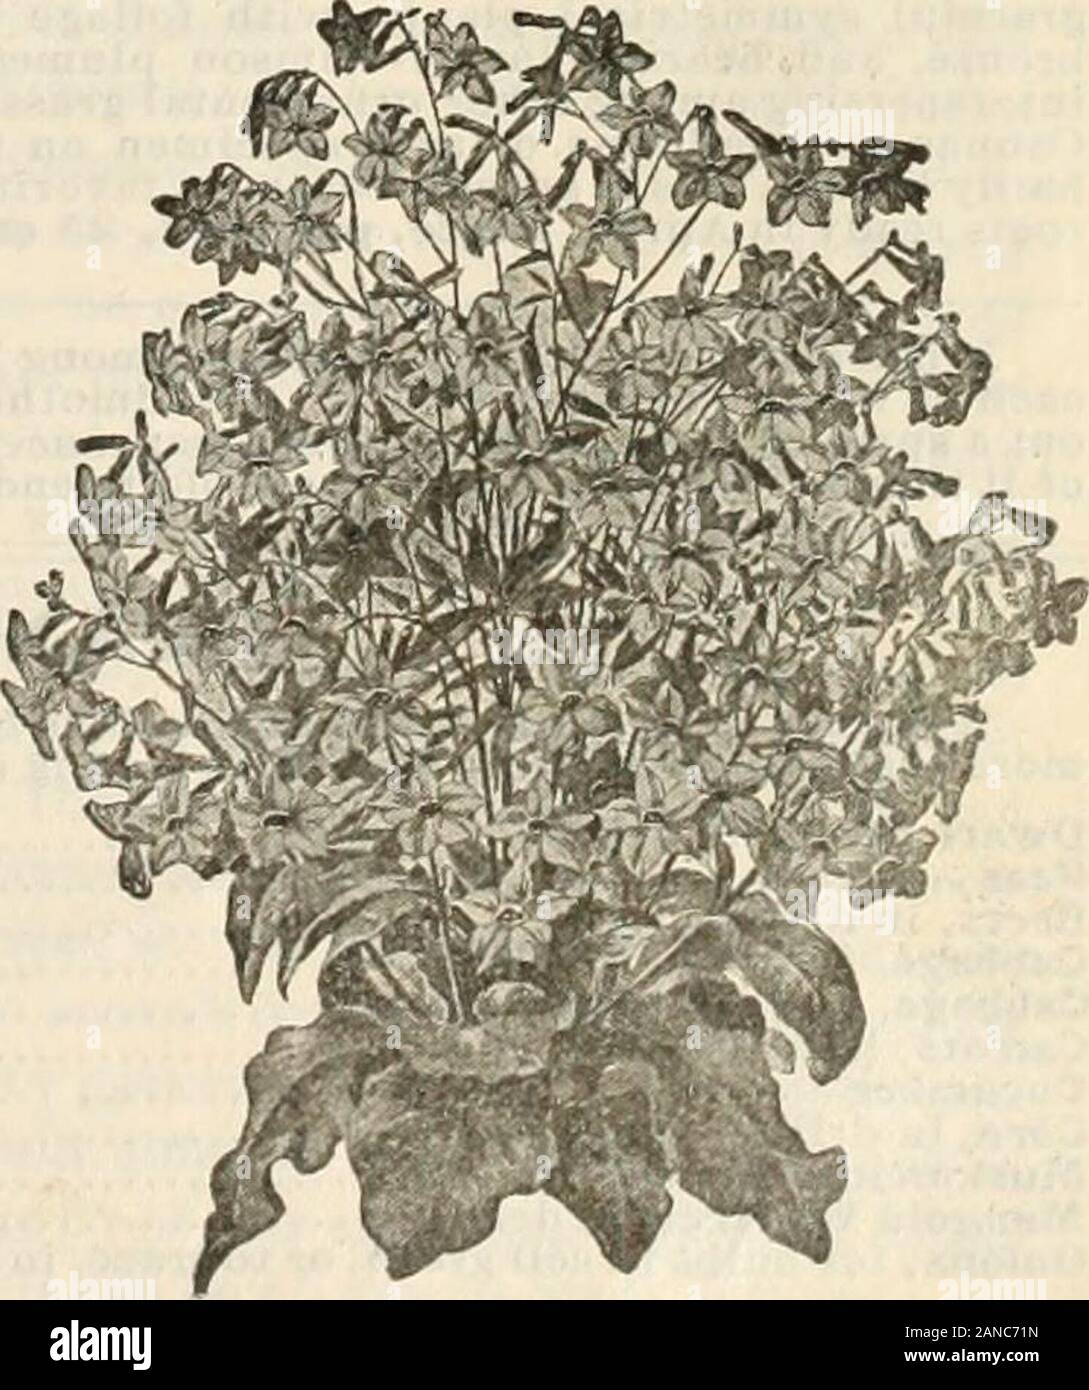 Vegetable and flower seeds catalogue : free for all . Mother of thousands or Kenilworth Ivy, forming neat little roundcushions of four and one-half to six inches inheight and breadth with glossy light greenfoliage, covered with small, pure white flowers.Recommended for edgings and ribbon lines.Price, per pkg., 15 cts. Blicotiana Sanderae. (A.) This beautiful hybrid Nicotiana was raisedin England and has been exhibited this seasonat the Temple show and elsewhere and in everycase has been .spoken of as the most strikinglybeautiful plant of the year. The originatorsdescribe it as forming bushy, m Stock Photo